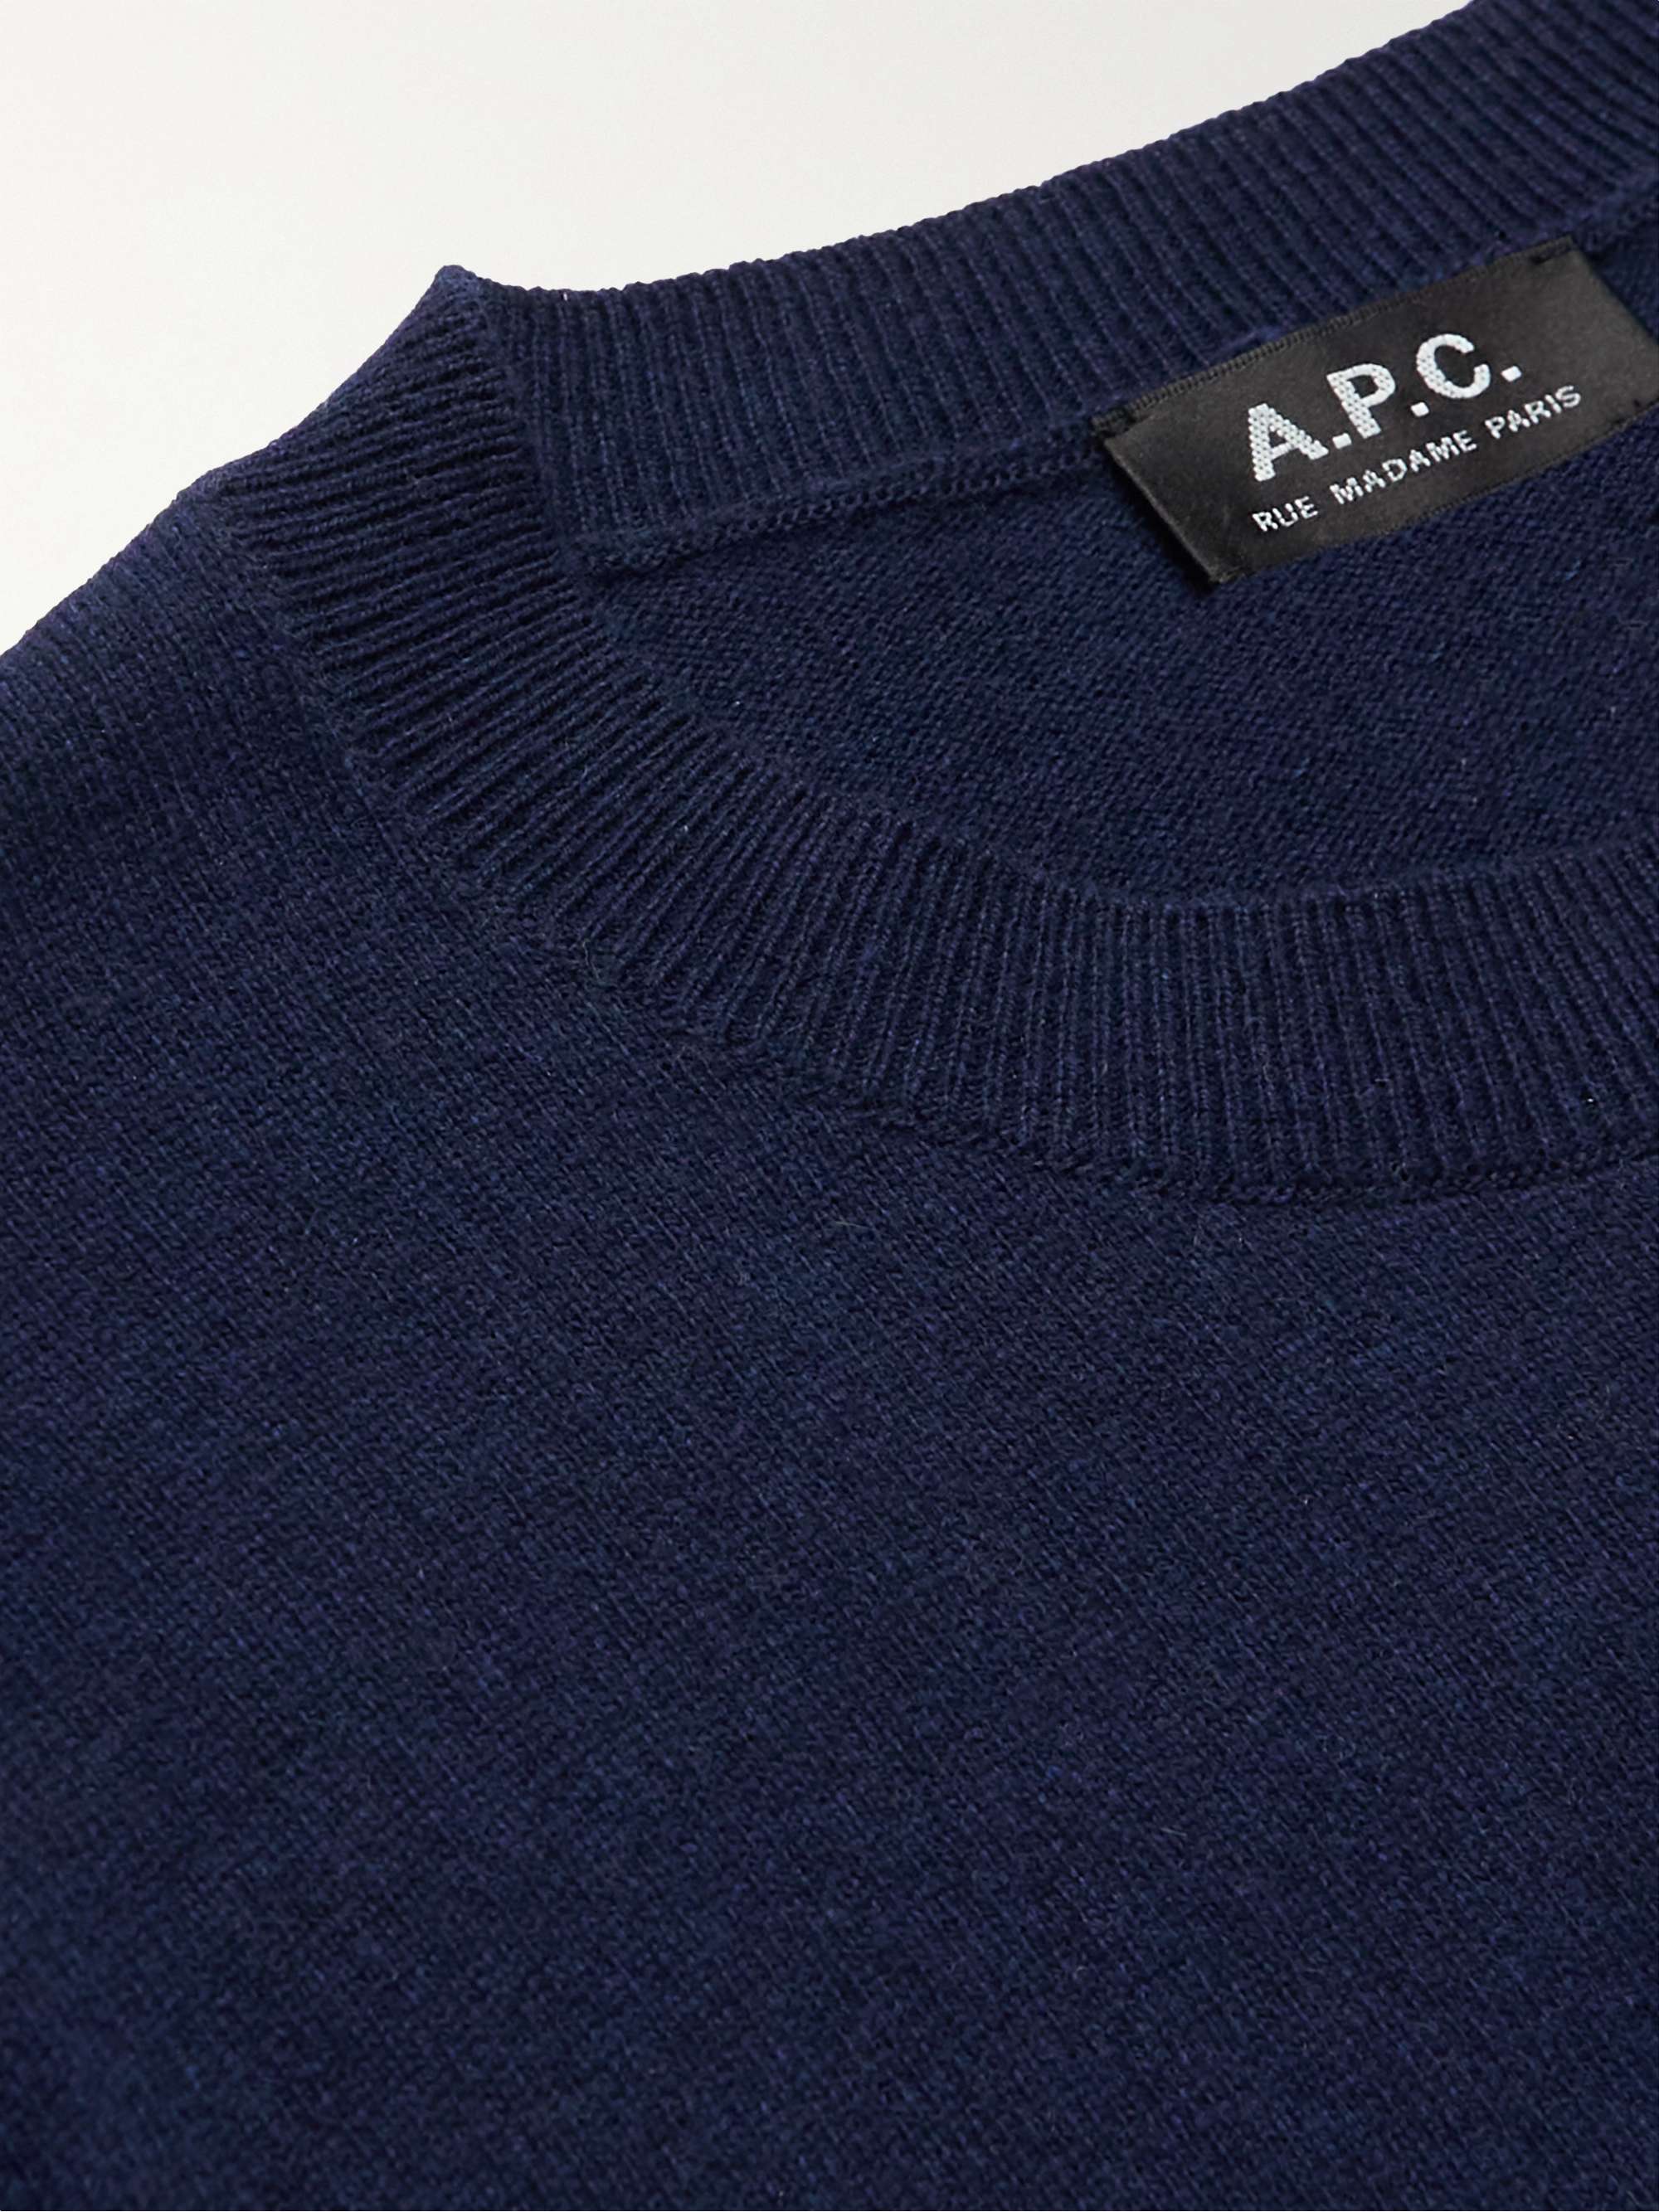 A.P.C. Maceo Logo-Embroidered Striped Cashmere and Cotton-Blend Sweater